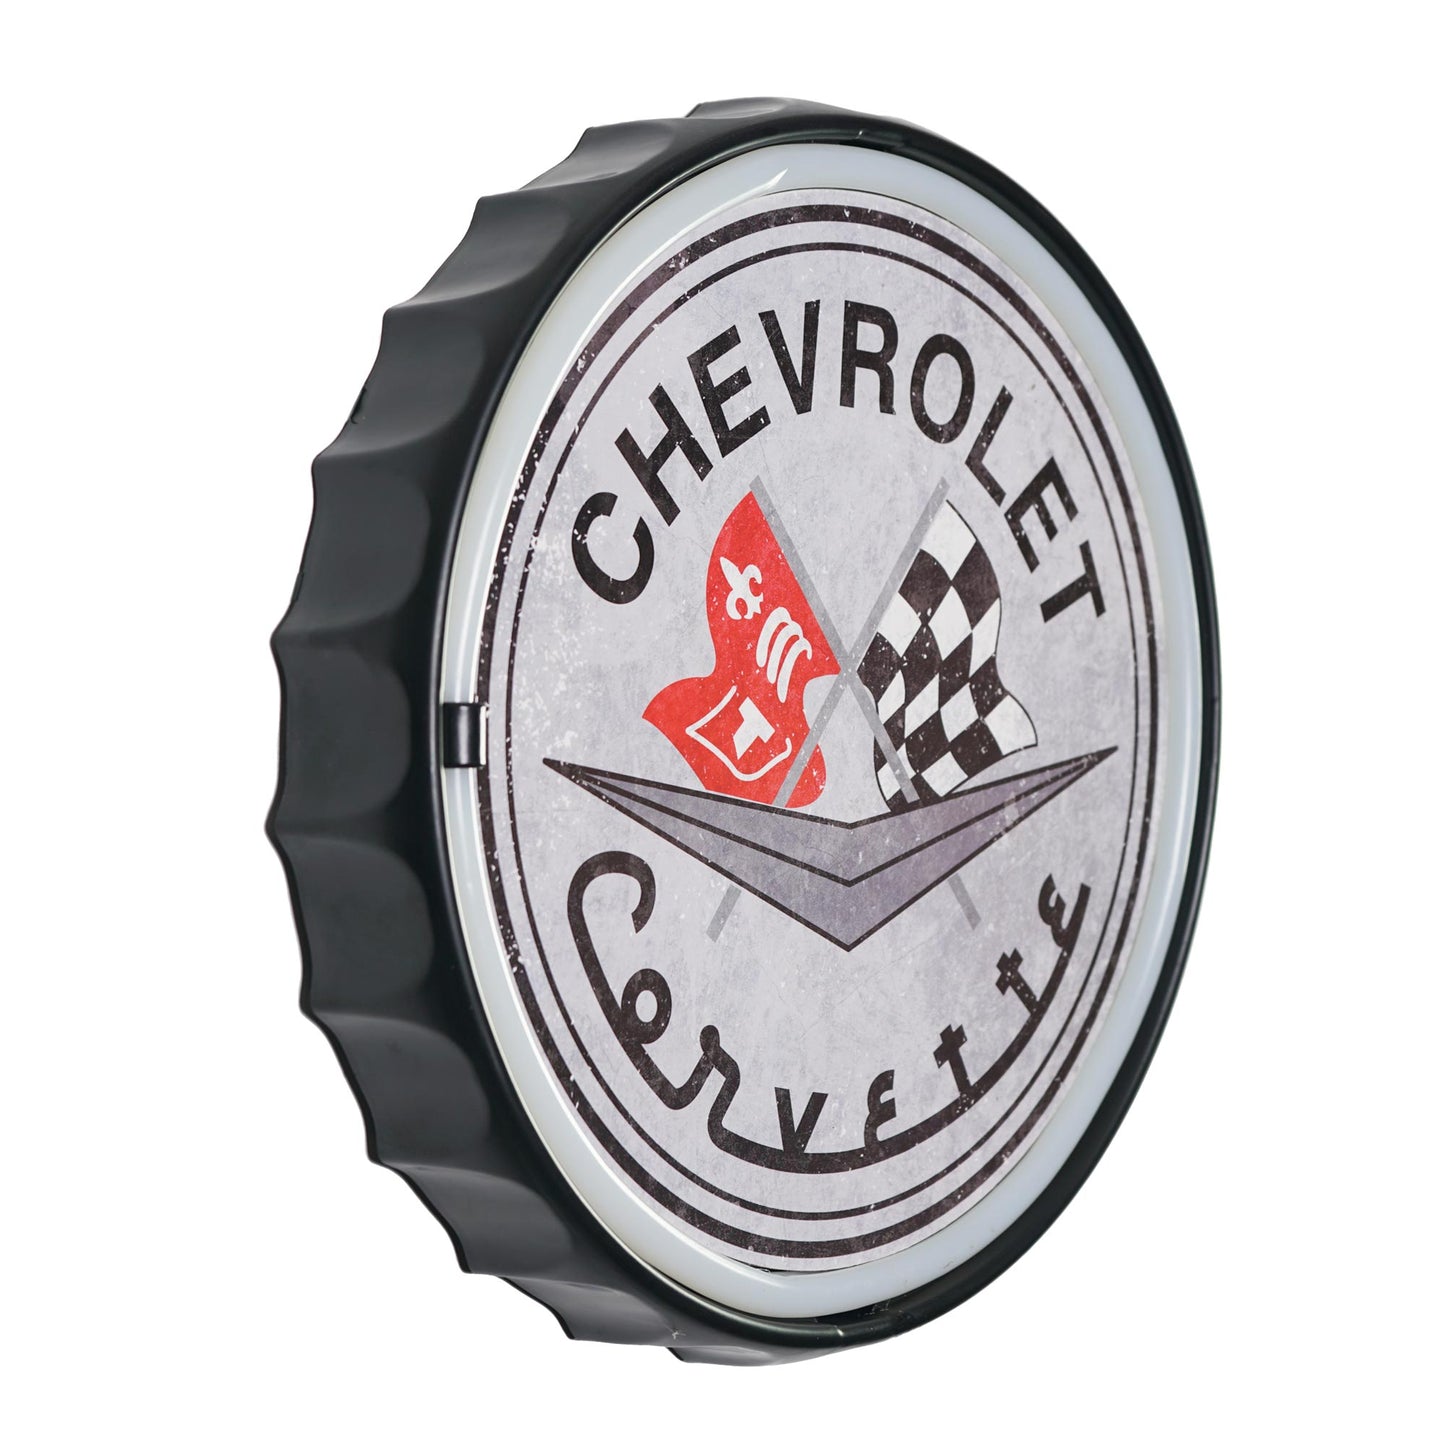 Licensed Chevrolet Bottle Cap Shaped Neon LED Rope Wall Sign (12.5")